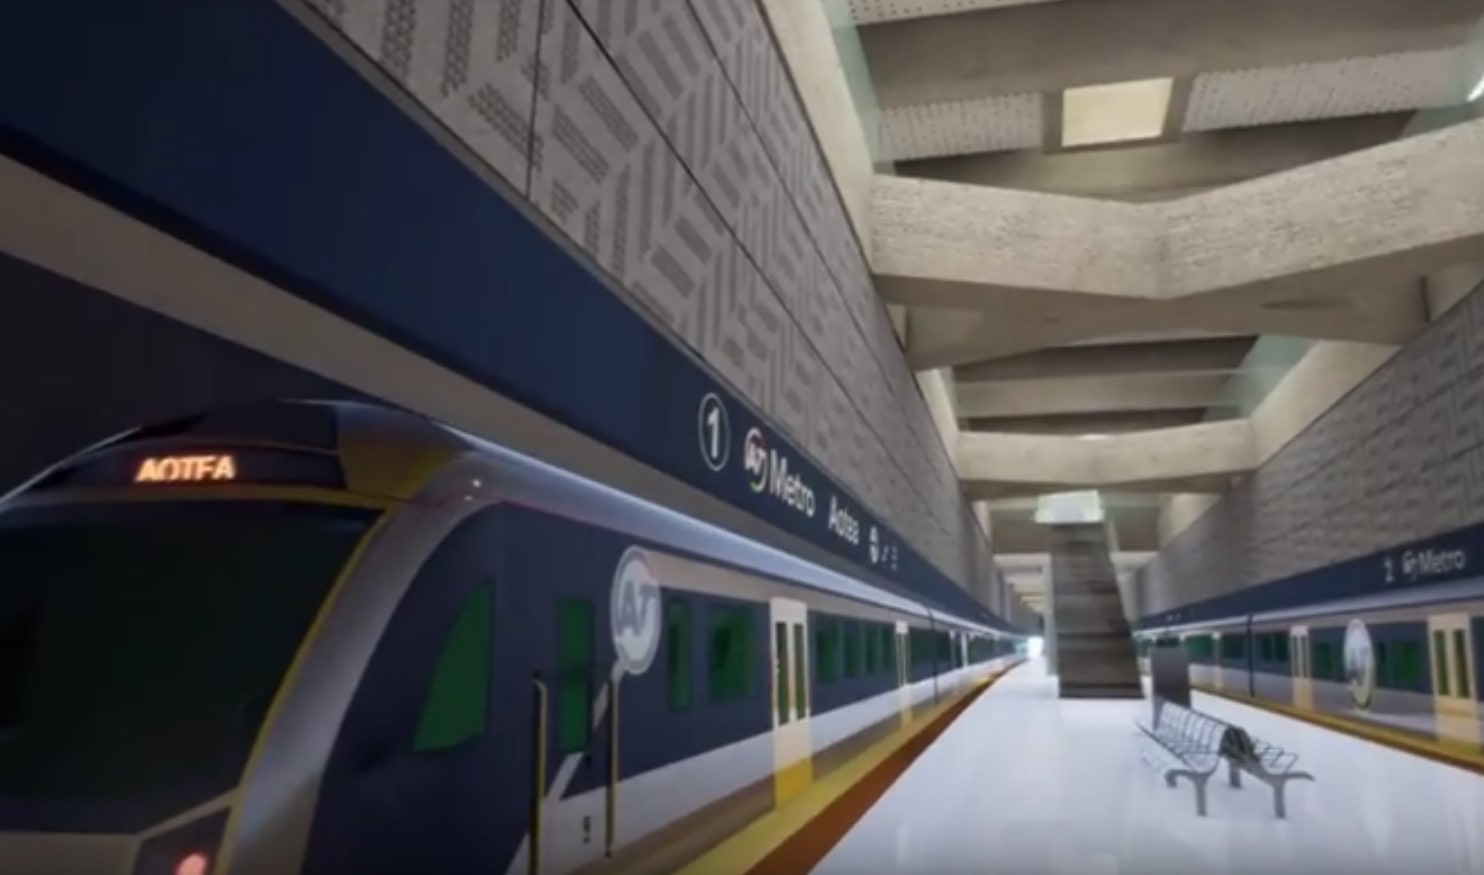 An impression of what the inside of Aotea Station will look like when it is completed in 2022.